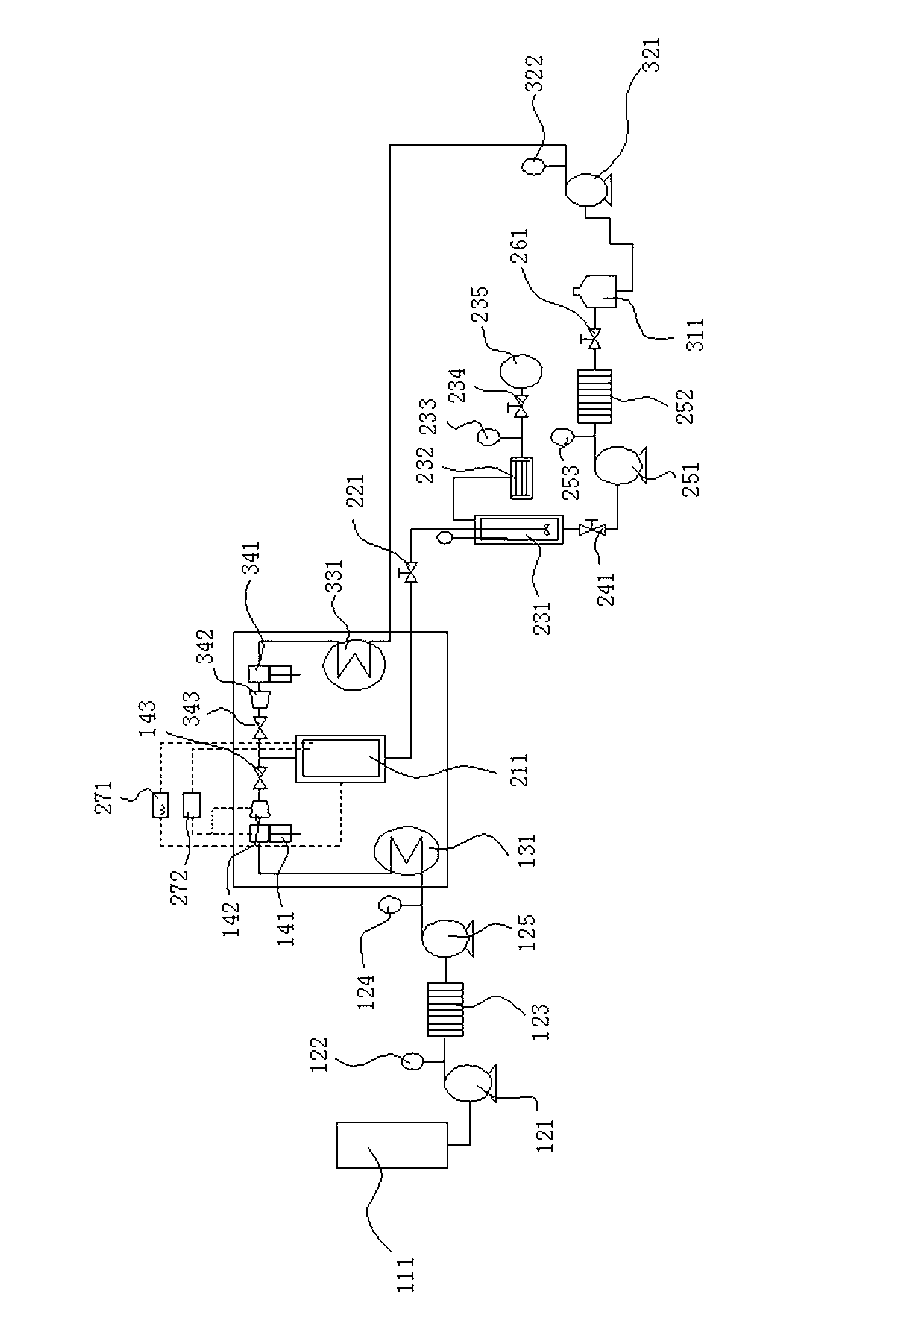 Continuous subcritical reaction device for ethyl ester fish oil hydrolysis